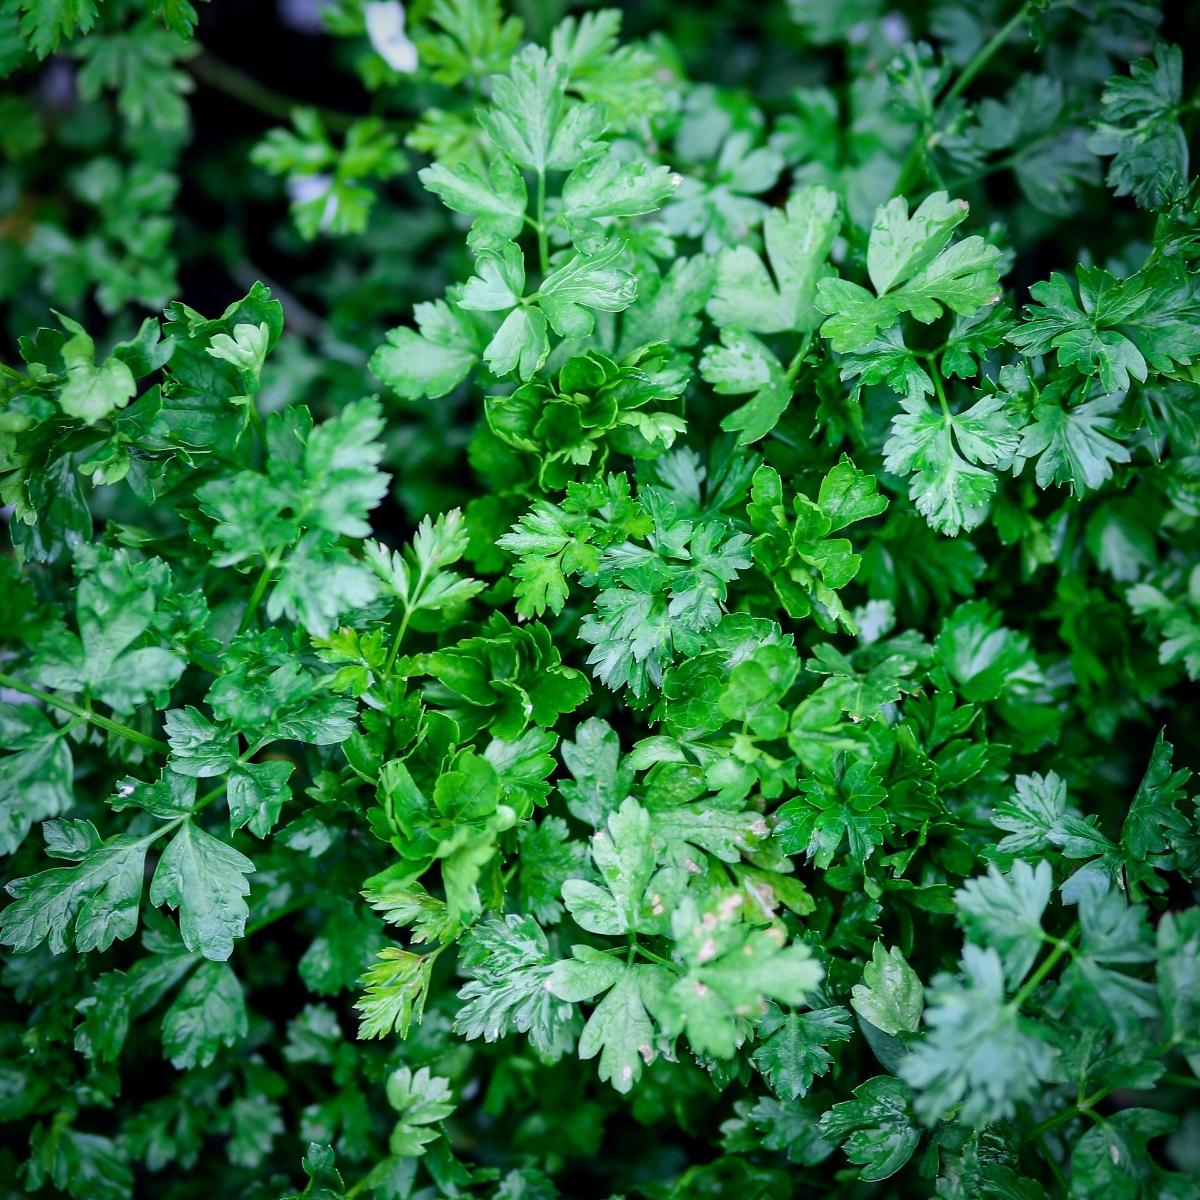 Looking down on deep green parsley from above.